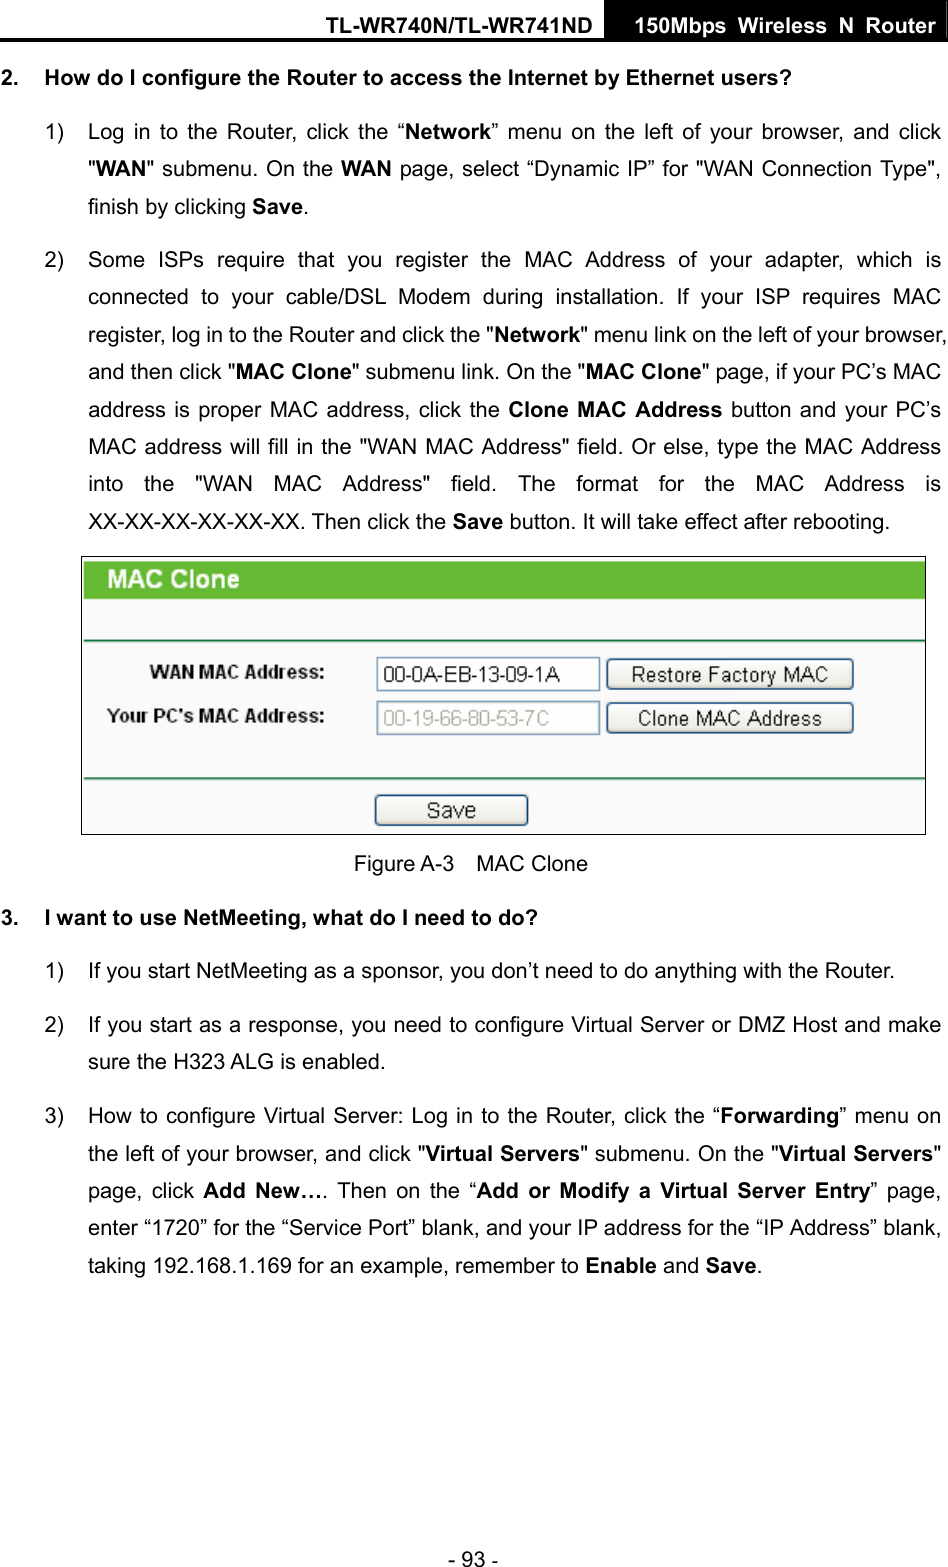 TL-WR740N/TL-WR741ND 150Mbps Wireless N Router - 93 - 2.  How do I configure the Router to access the Internet by Ethernet users? 1)  Log in to the Router, click the “Network” menu on the left of your browser, and click &quot;WAN&quot; submenu. On the WAN page, select “Dynamic IP” for &quot;WAN Connection Type&quot;, finish by clicking Save. 2)  Some ISPs require that you register the MAC Address of your adapter, which is connected to your cable/DSL Modem during installation. If your ISP requires MAC register, log in to the Router and click the &quot;Network&quot; menu link on the left of your browser, and then click &quot;MAC Clone&quot; submenu link. On the &quot;MAC Clone&quot; page, if your PC’s MAC address is proper MAC address, click the Clone MAC Address button and your PC’s MAC address will fill in the &quot;WAN MAC Address&quot; field. Or else, type the MAC Address into the &quot;WAN MAC Address&quot; field. The format for the MAC Address is XX-XX-XX-XX-XX-XX. Then click the Save button. It will take effect after rebooting.  Figure A-3  MAC Clone 3.  I want to use NetMeeting, what do I need to do? 1)  If you start NetMeeting as a sponsor, you don’t need to do anything with the Router. 2)  If you start as a response, you need to configure Virtual Server or DMZ Host and make sure the H323 ALG is enabled. 3)  How to configure Virtual Server: Log in to the Router, click the “Forwarding” menu on the left of your browser, and click &quot;Virtual Servers&quot; submenu. On the &quot;Virtual Servers&quot; page, click Add New…. Then on the “Add or Modify a Virtual Server Entry” page, enter “1720” for the “Service Port” blank, and your IP address for the “IP Address” blank, taking 192.168.1.169 for an example, remember to Enable and Save.  